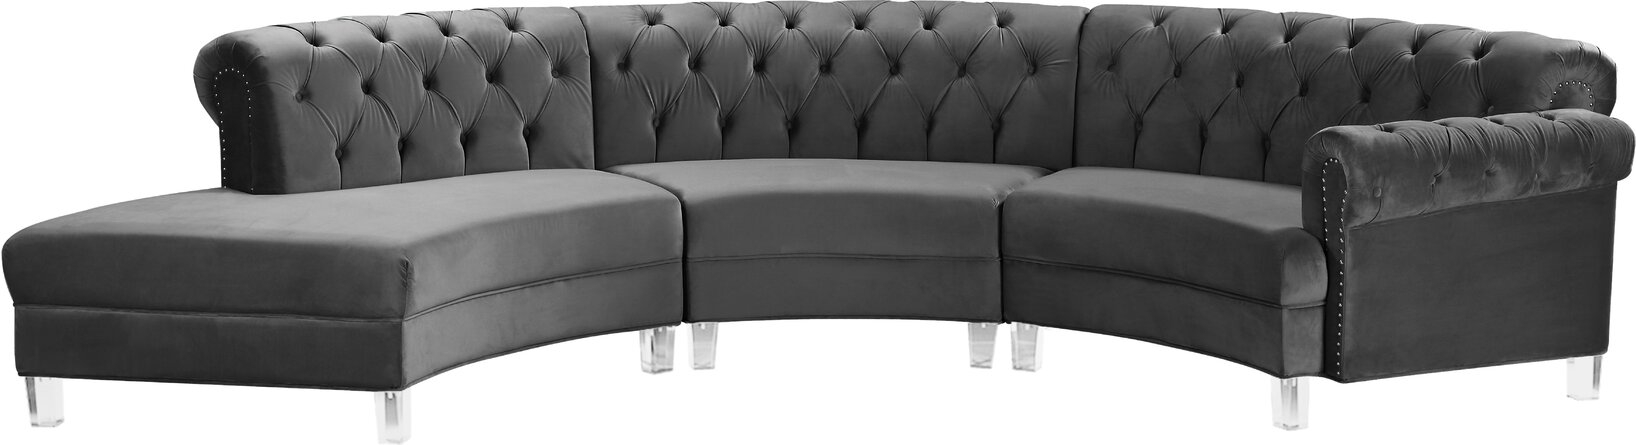 Macaluso Symmetrical Sectional - Image 1